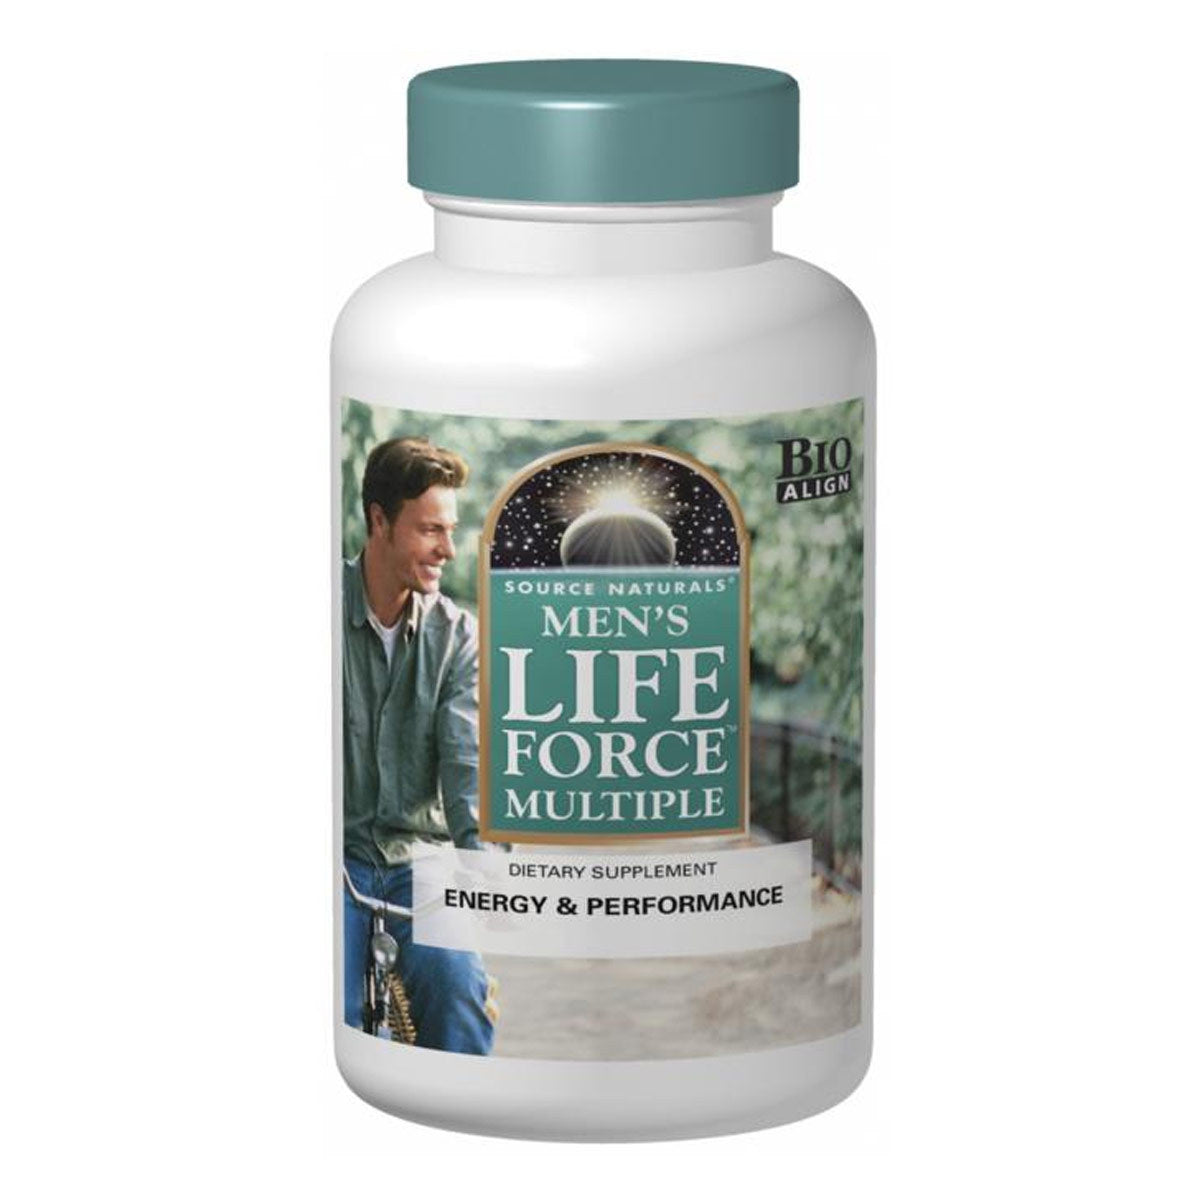 Primary image of Men's Life Force Multiple